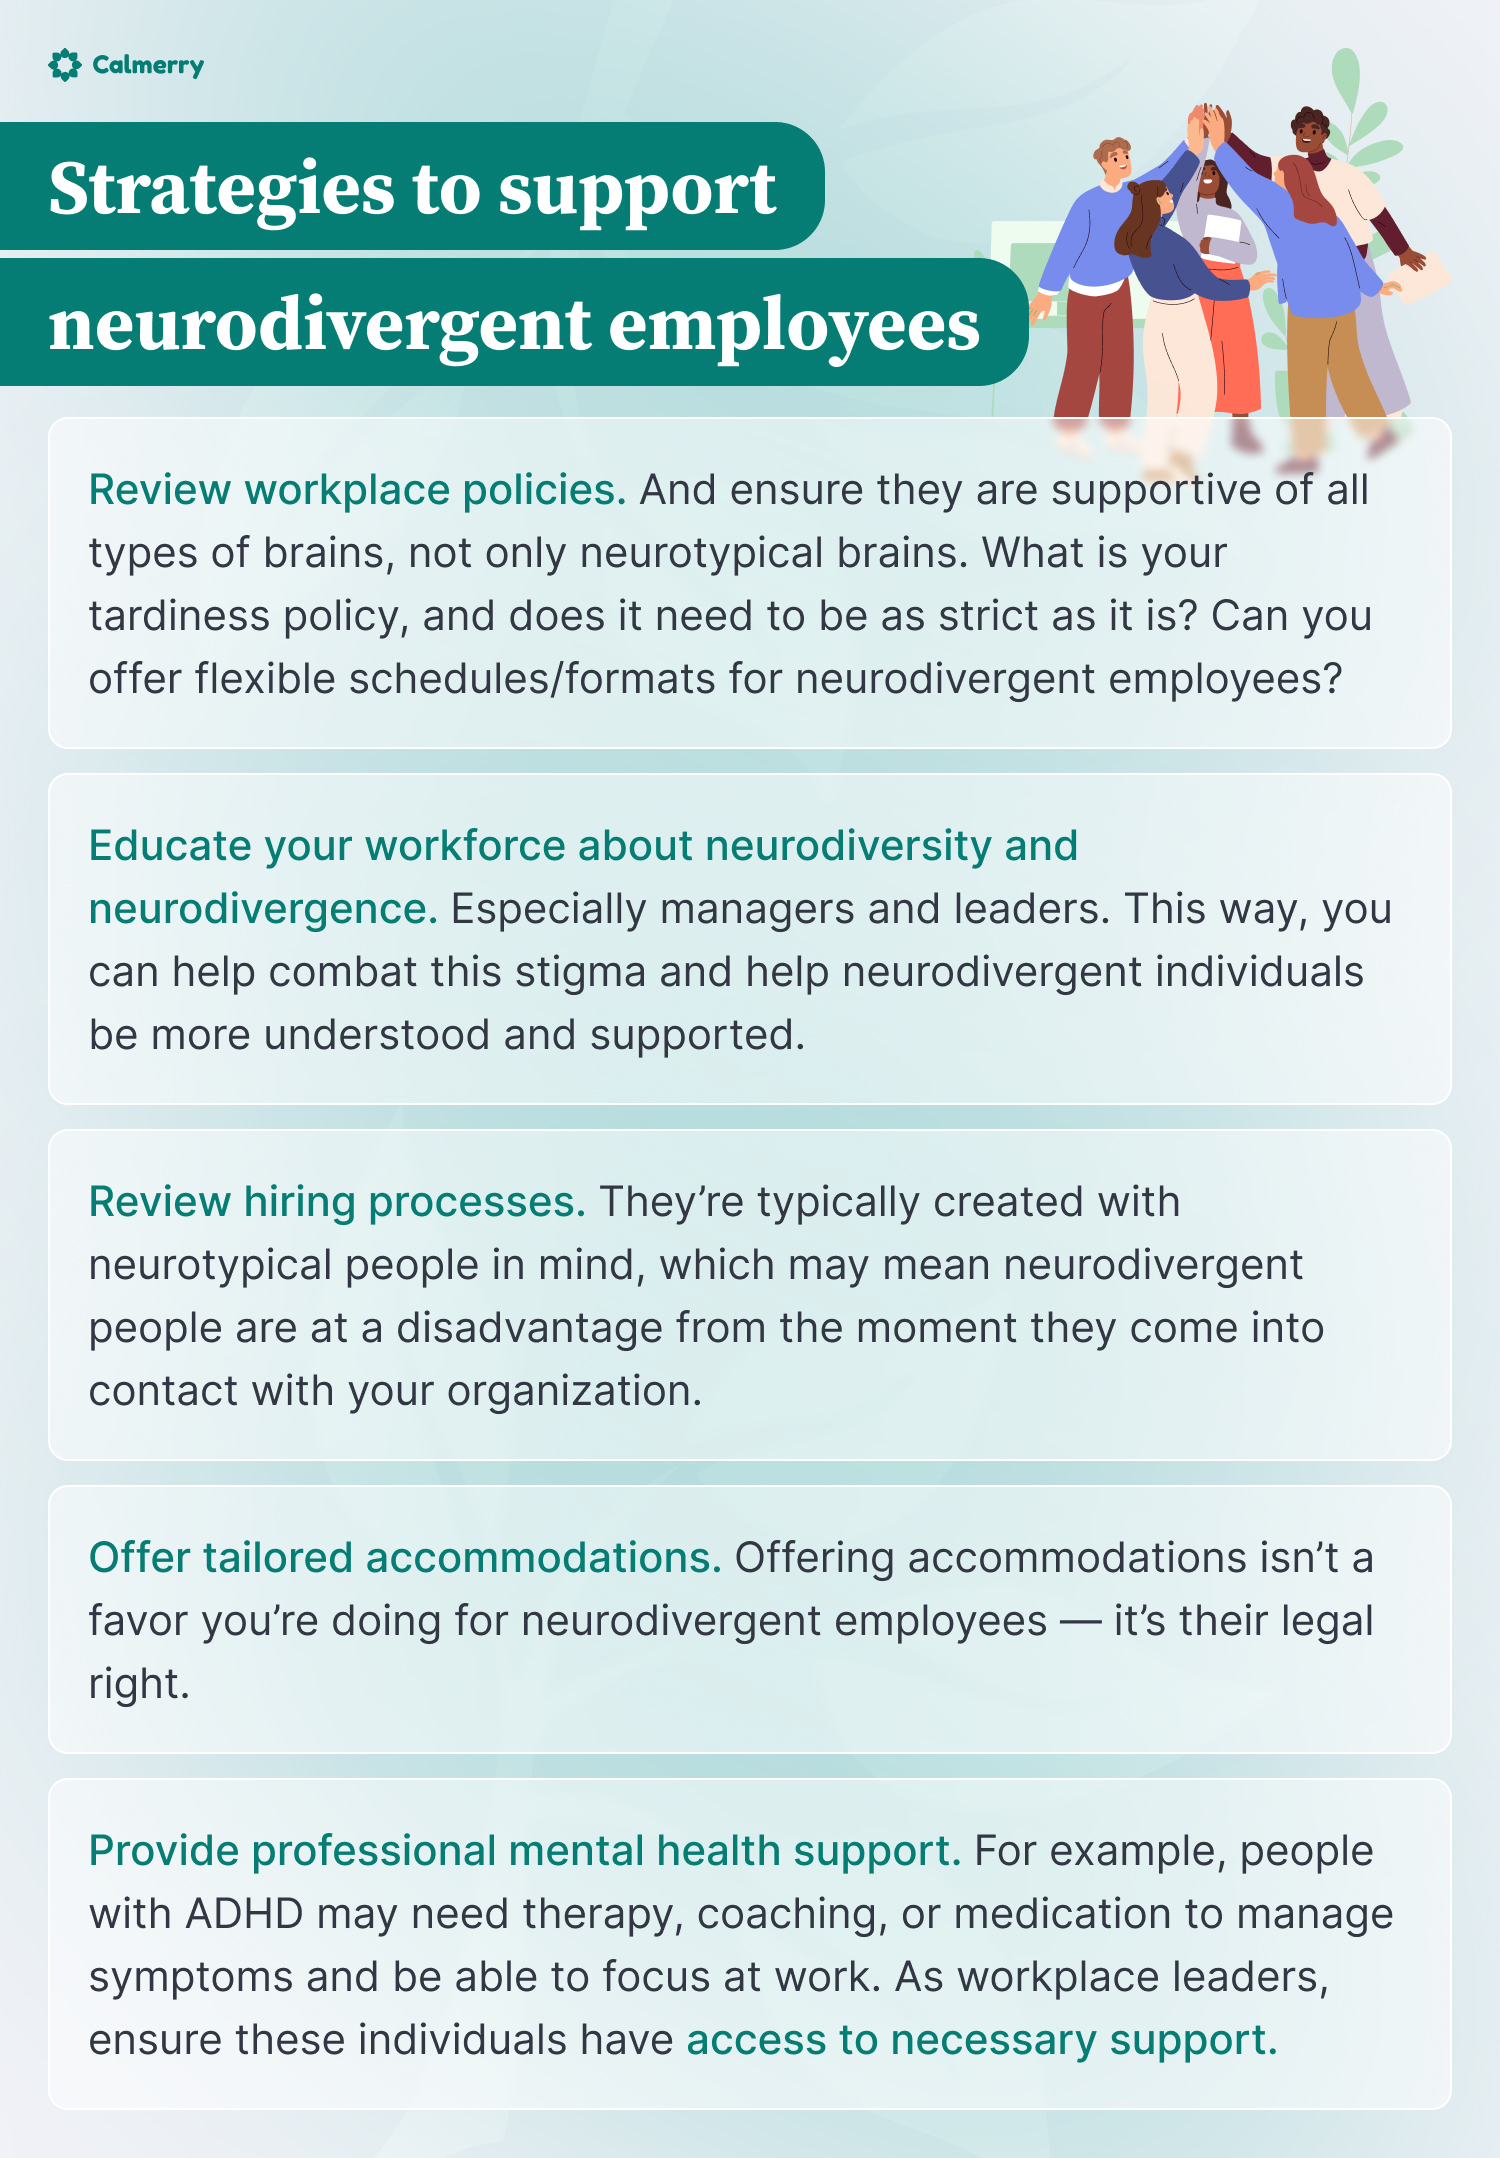 Infographic titled 'Strategies to support neurodivergent employees' with five key points: 1) Review workplace policies to support all types of brains, 2) Educate your workforce about neurodiversity and neurodivergence, 3) Review hiring processes to avoid disadvantages for neurodivergent individuals, 4) Offer tailored accommodations as a legal right, and 5) Provide professional mental health support for neurodivergent employees. The image features an illustration of a diverse team collaborating.